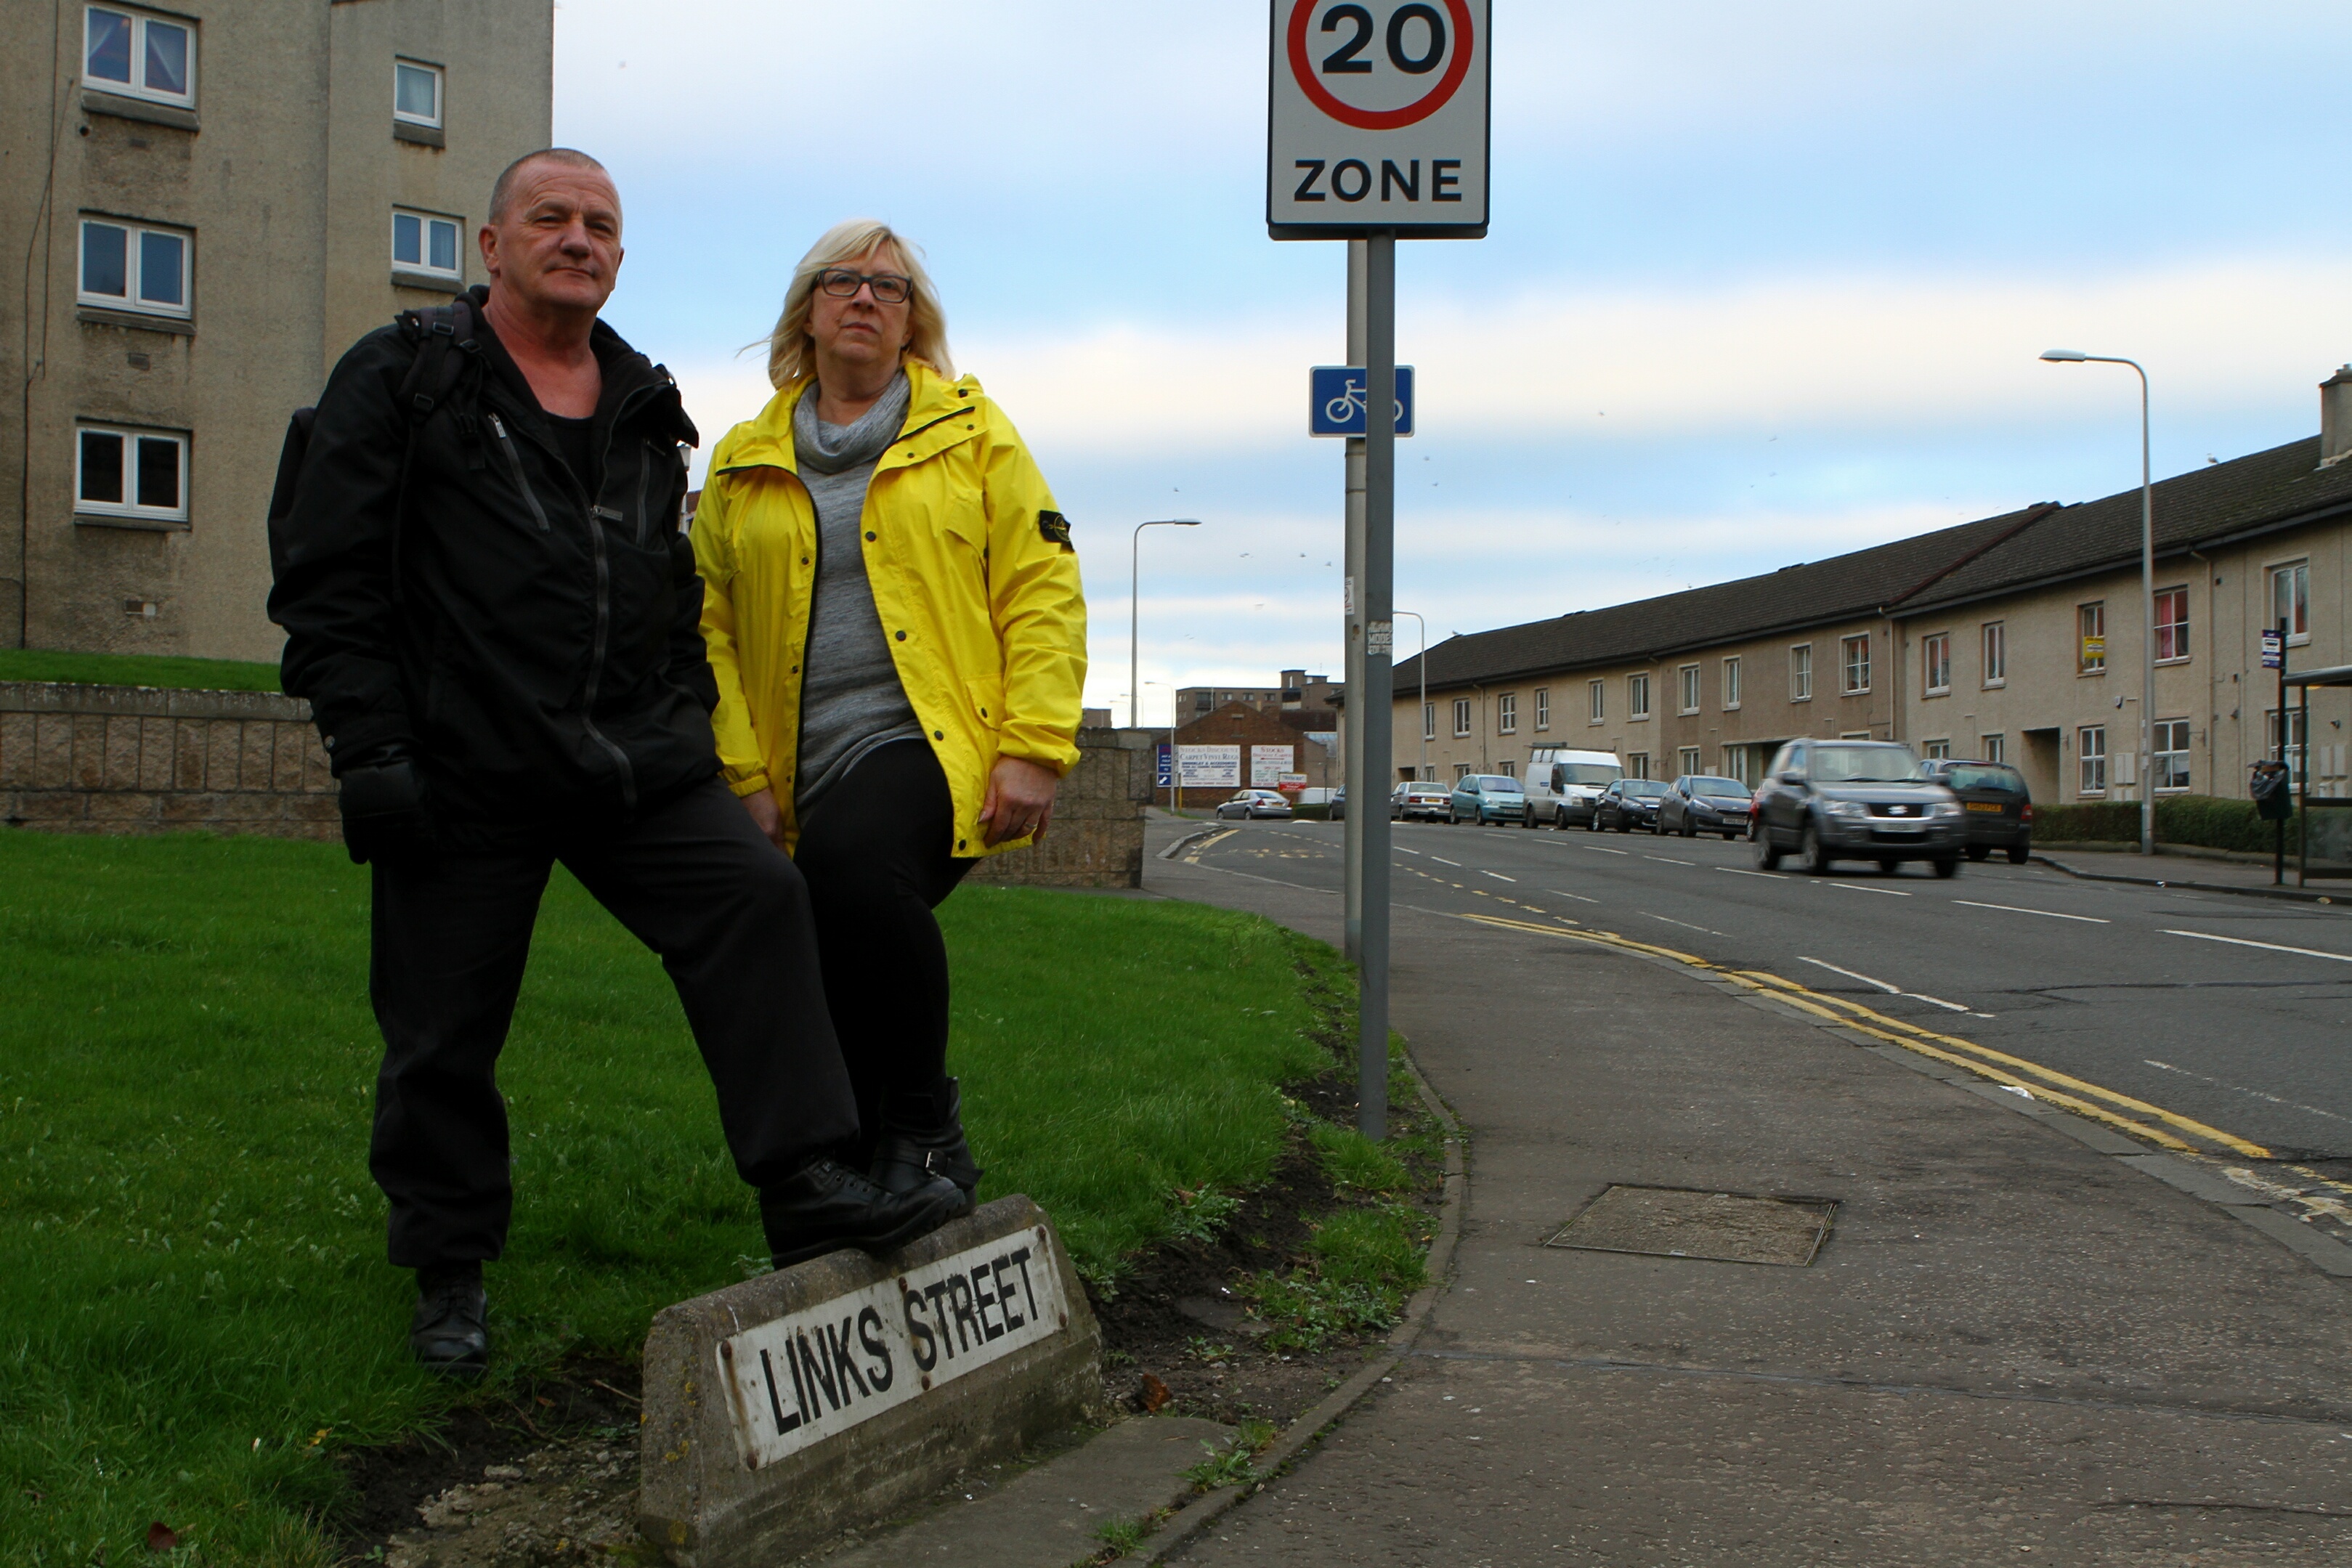 Rab O'Donnell and Marie Erke of the Linktown Tenants and Residents Association, standing at the junction of Links Street and Pratt Street in Kirkcaldy, where roadworks are due to commence and householders have not been informed.